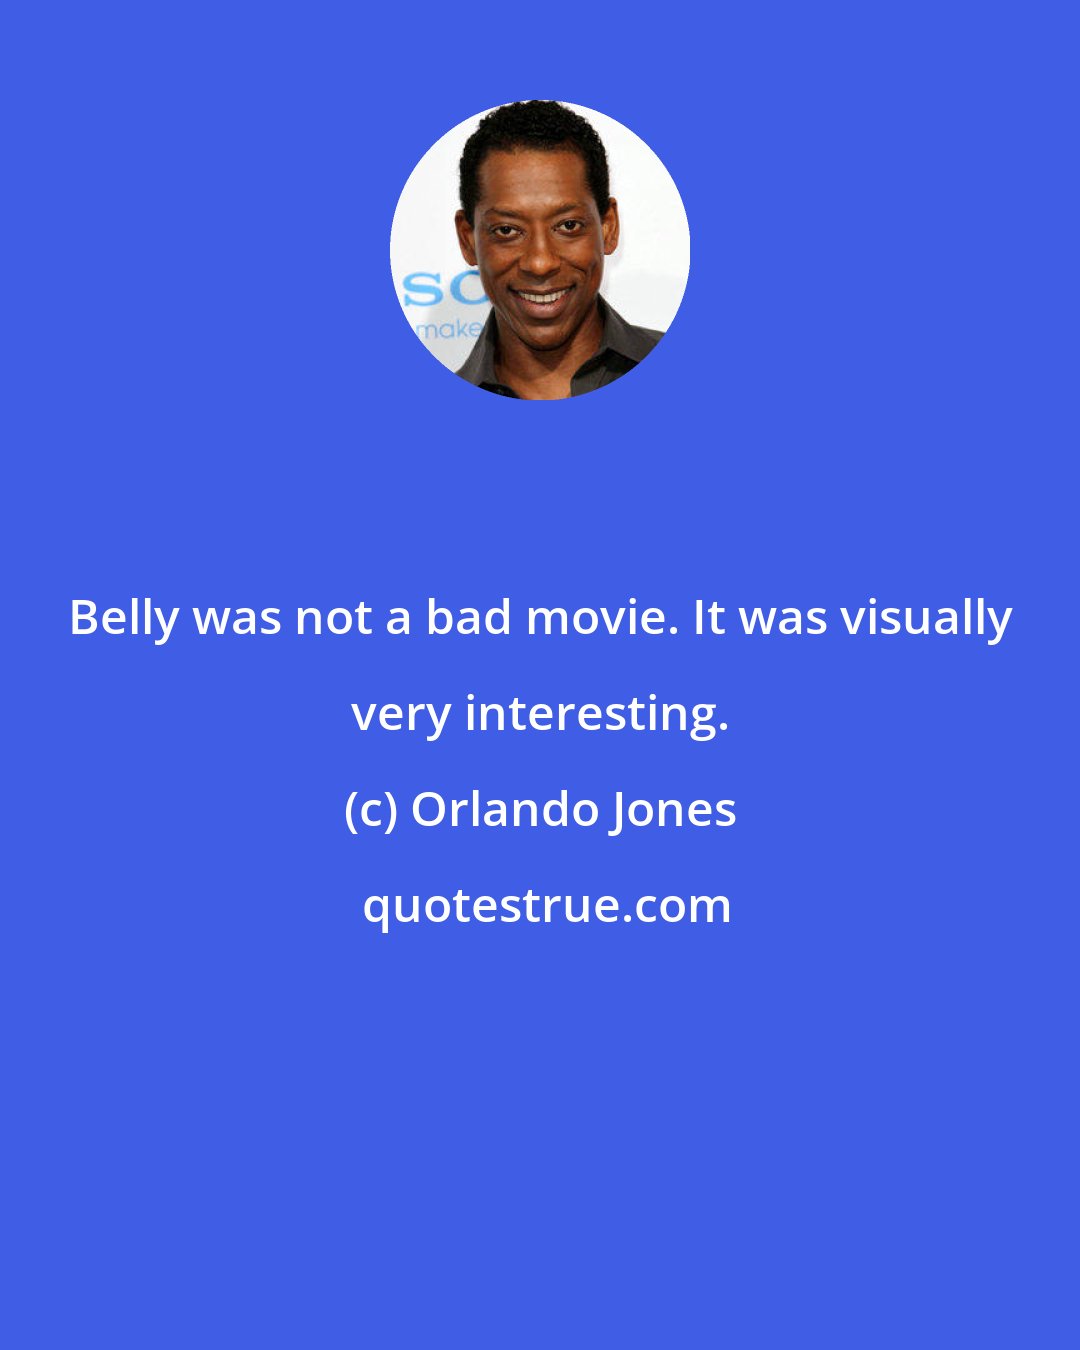 Orlando Jones: Belly was not a bad movie. It was visually very interesting.